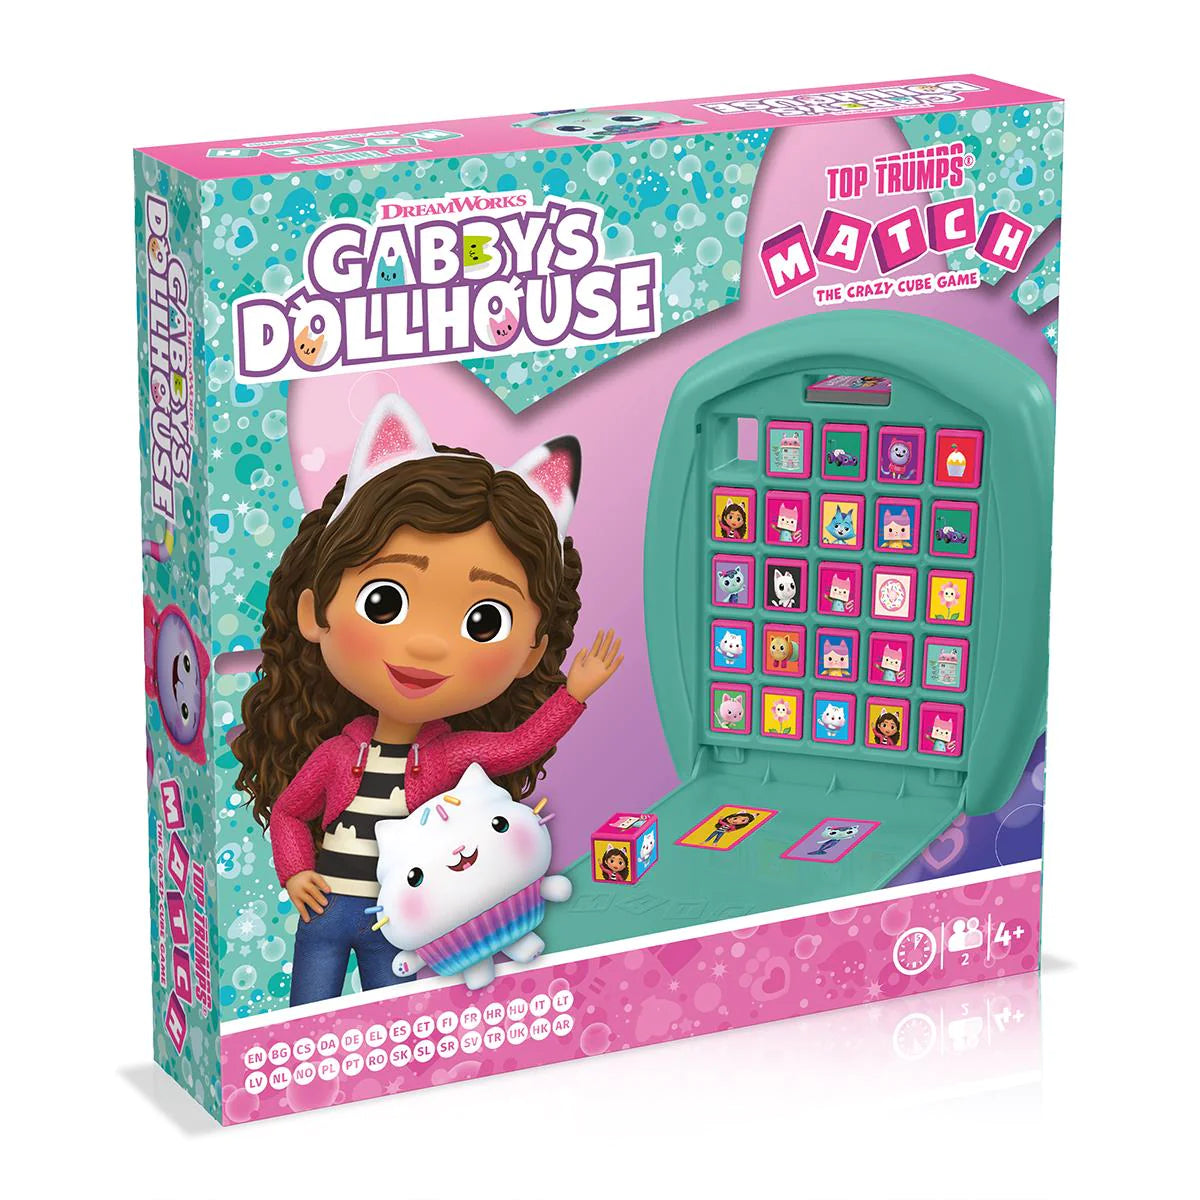 Gabby’s Dollhouse Top Trumps Match - The Crazy Cube Game